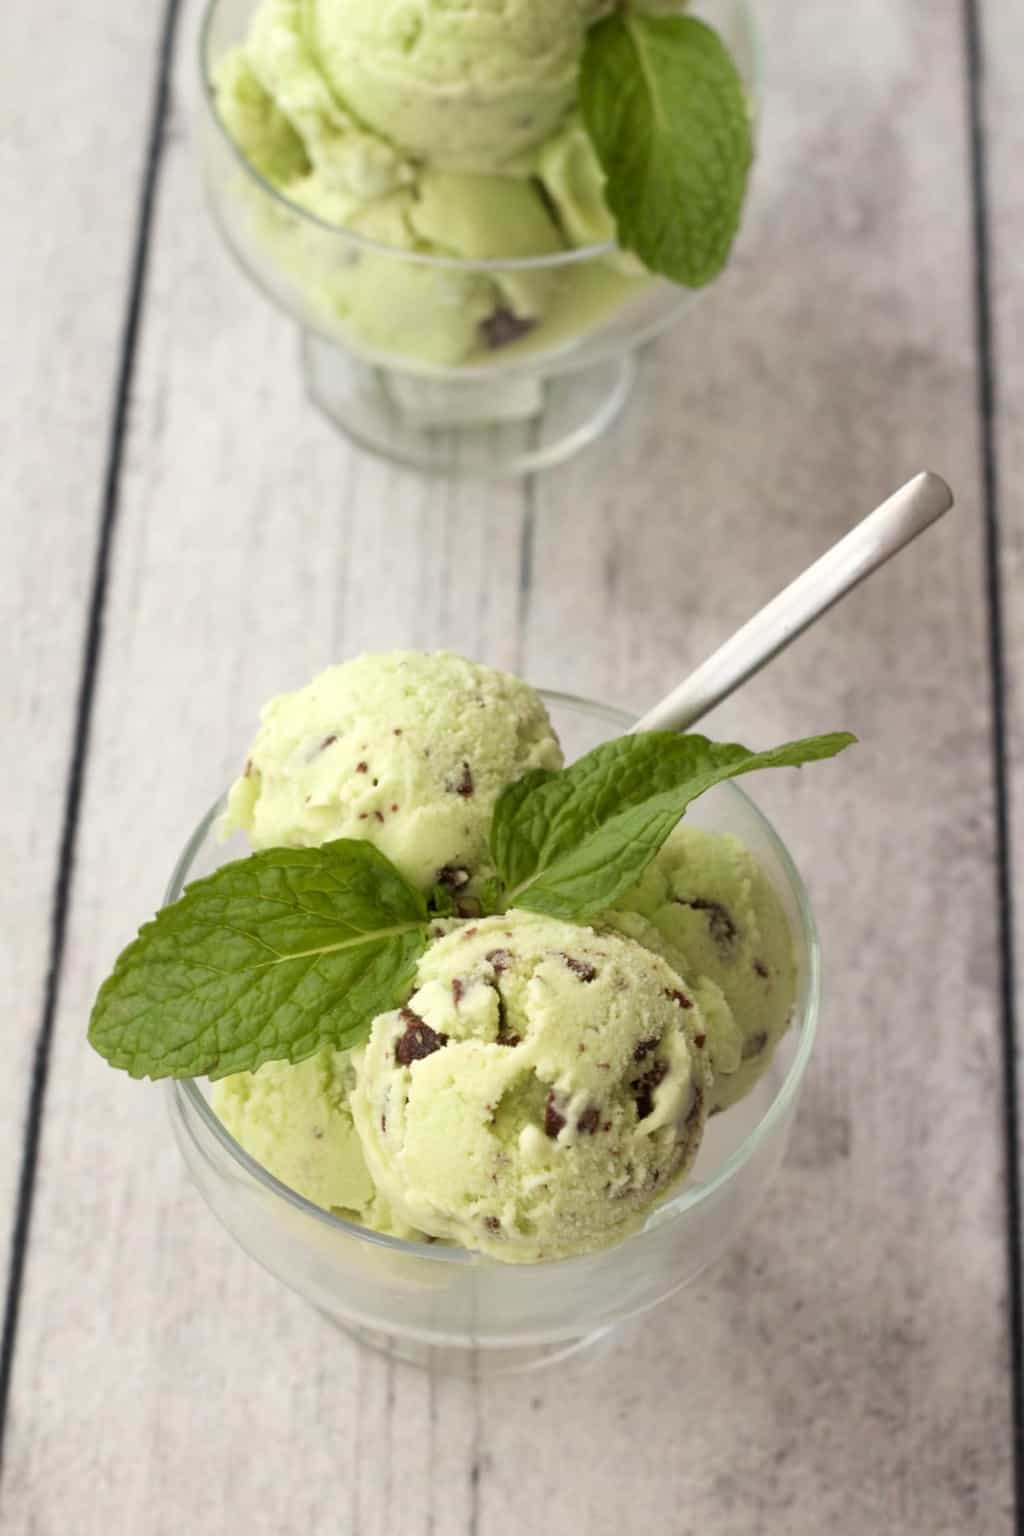 Mint chocolate chip ice cream scoops in glass bowls. 